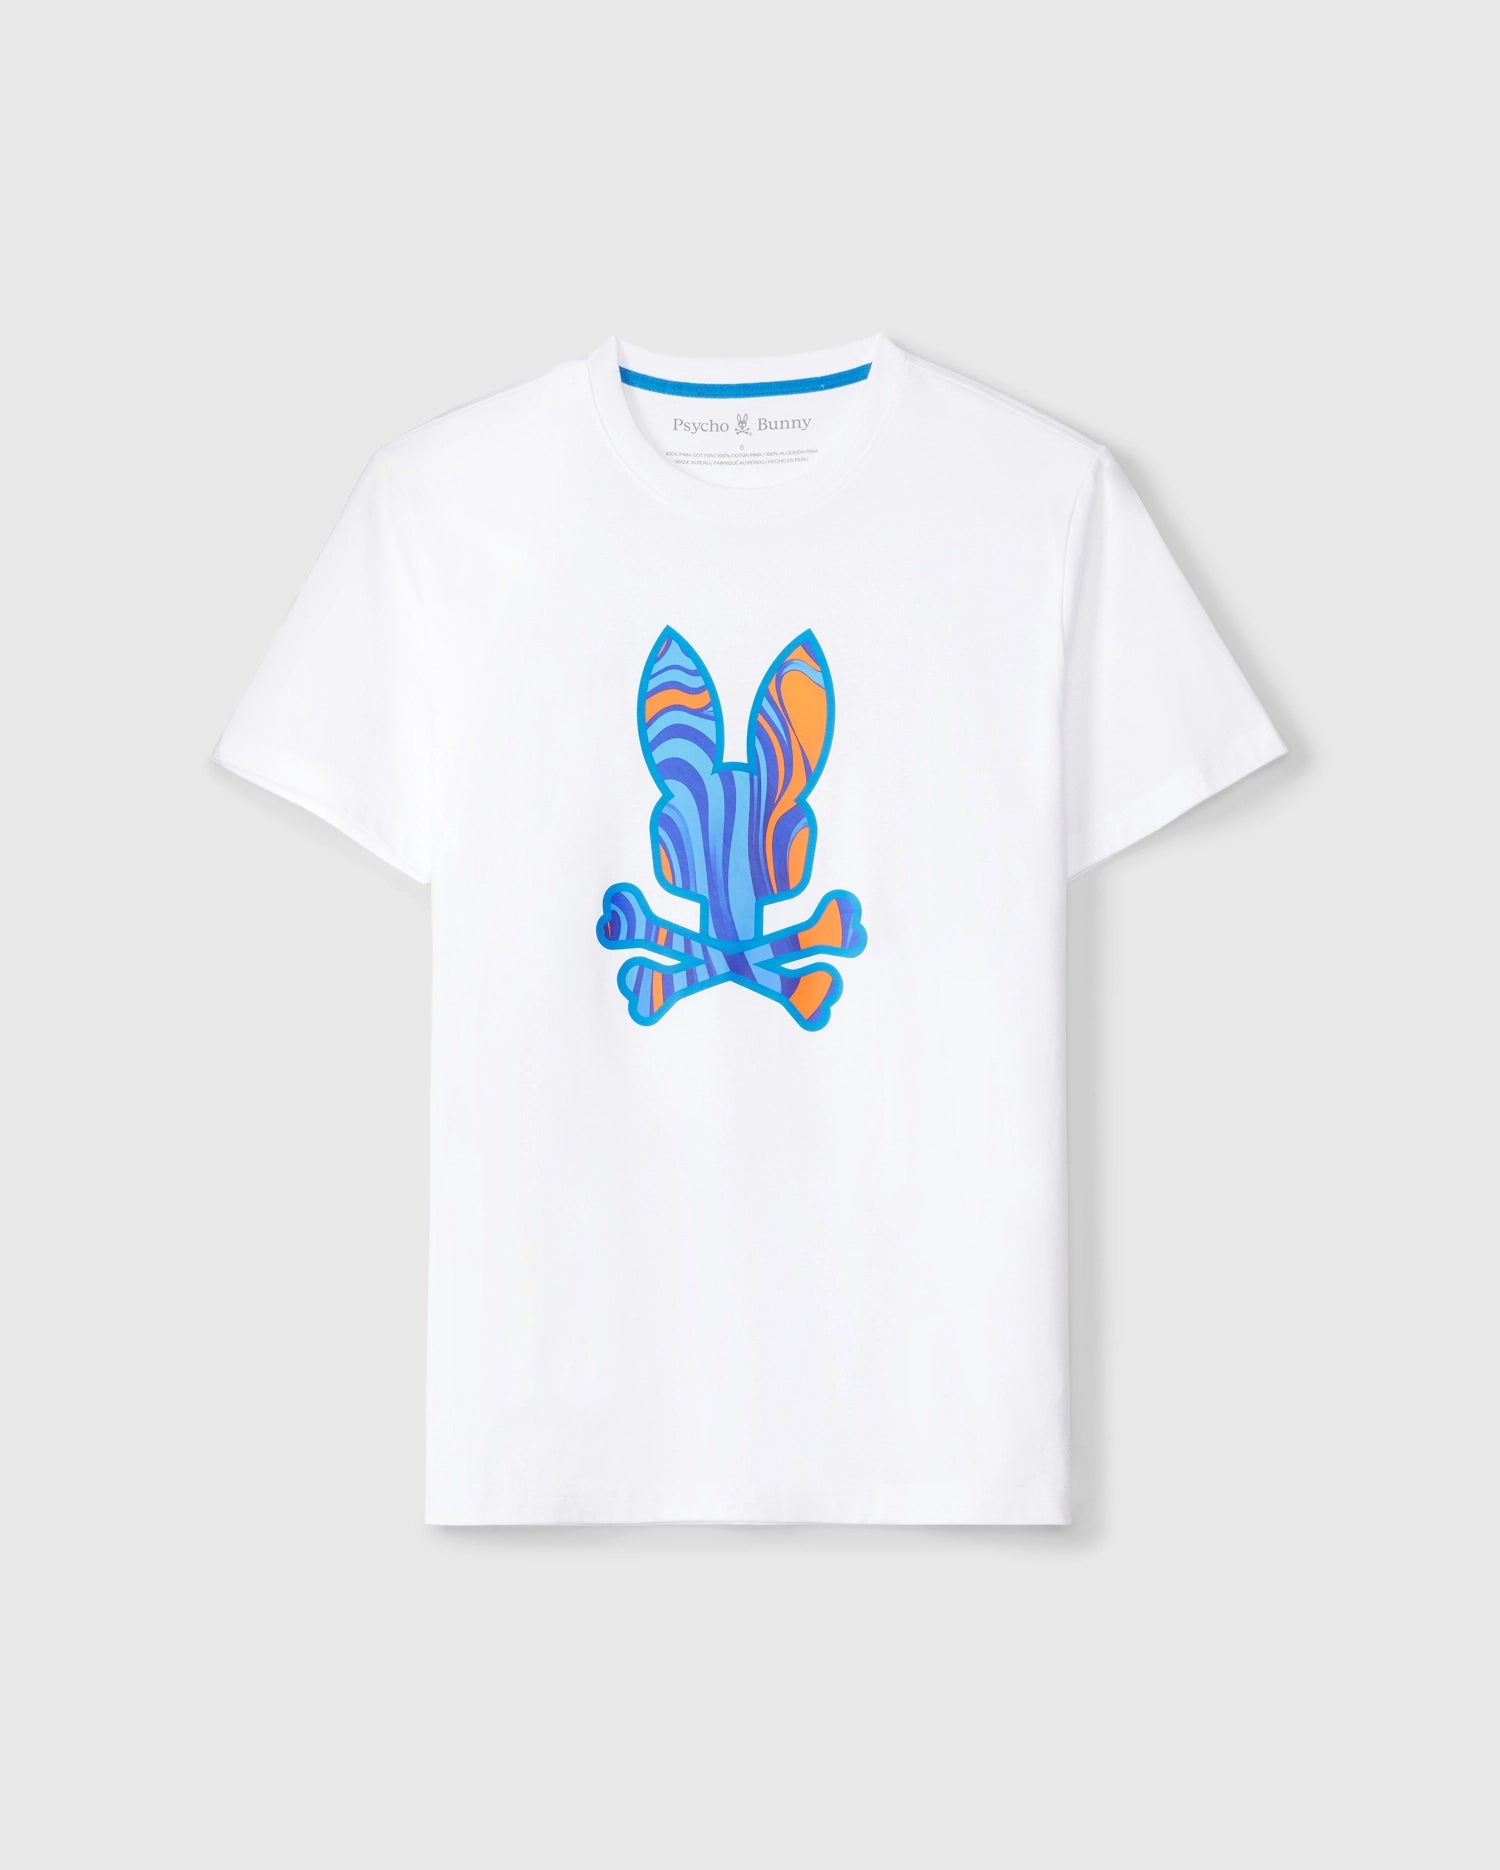 A white MENS NEVADA GRAPHIC TEE - B6U515C200 featuring a swirl-patterned Bunny print in the center of the chest. The stylized bunny head with long ears crossed over two bones is rendered in a mix of blue, orange, and purple patterns on a plain light gray background. Crafted from soft Pima cotton for ultimate comfort by Psycho Bunny.